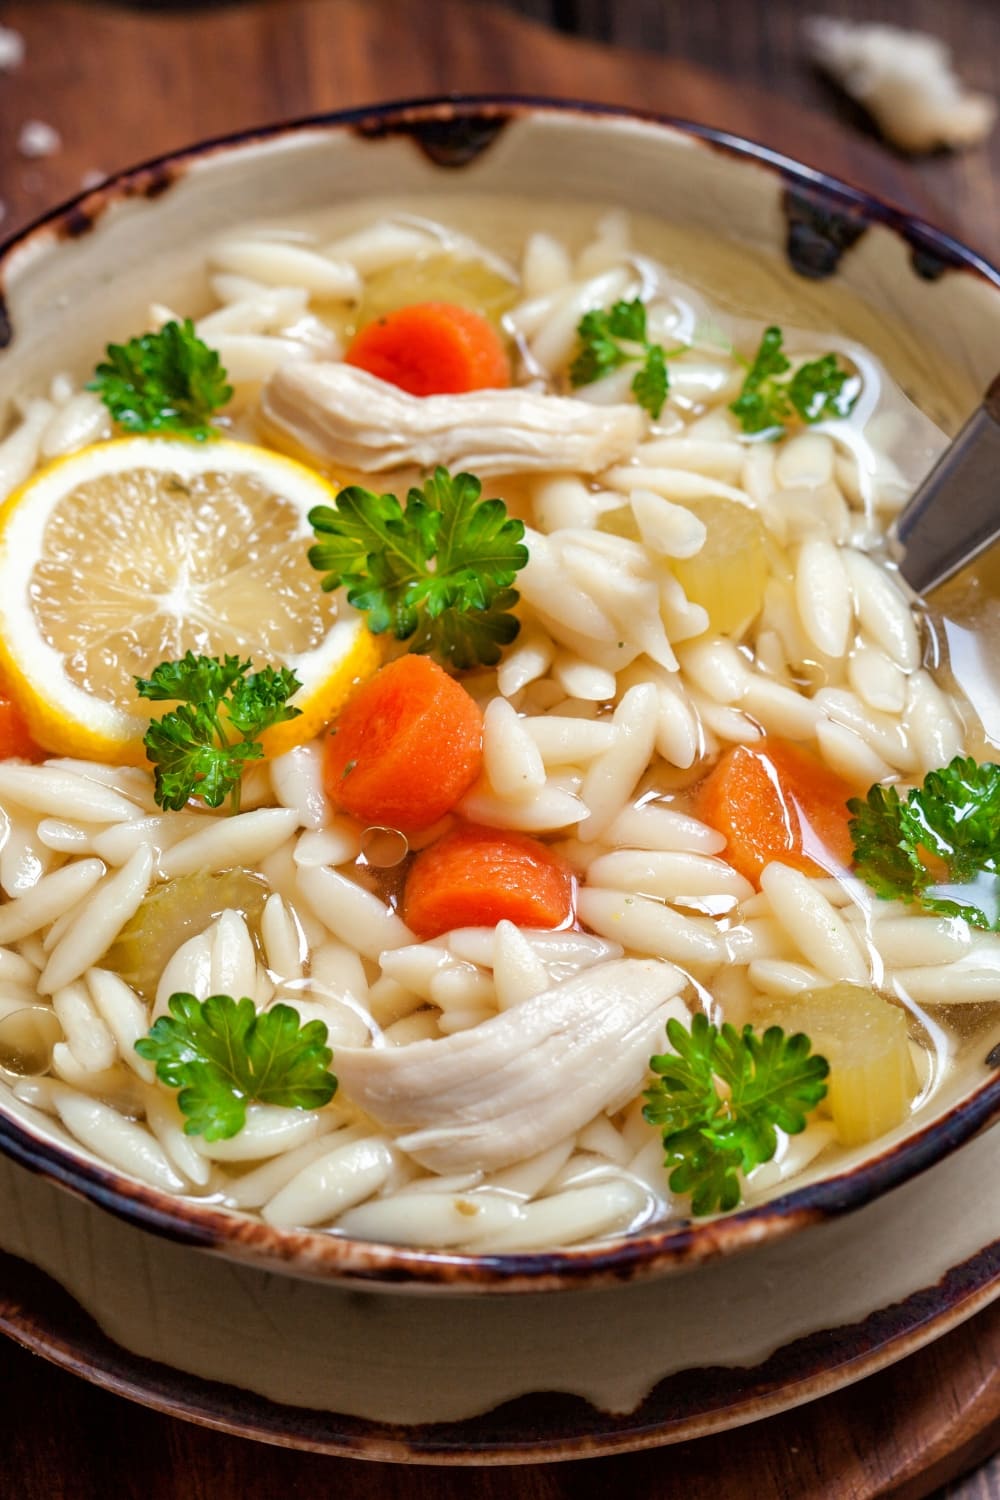 Bowl of Chicken Orzo Soup Made with Carrots, Chicken Meat and Orzo Pasta, Garnished With Fresh Parsley and Lemon Slice